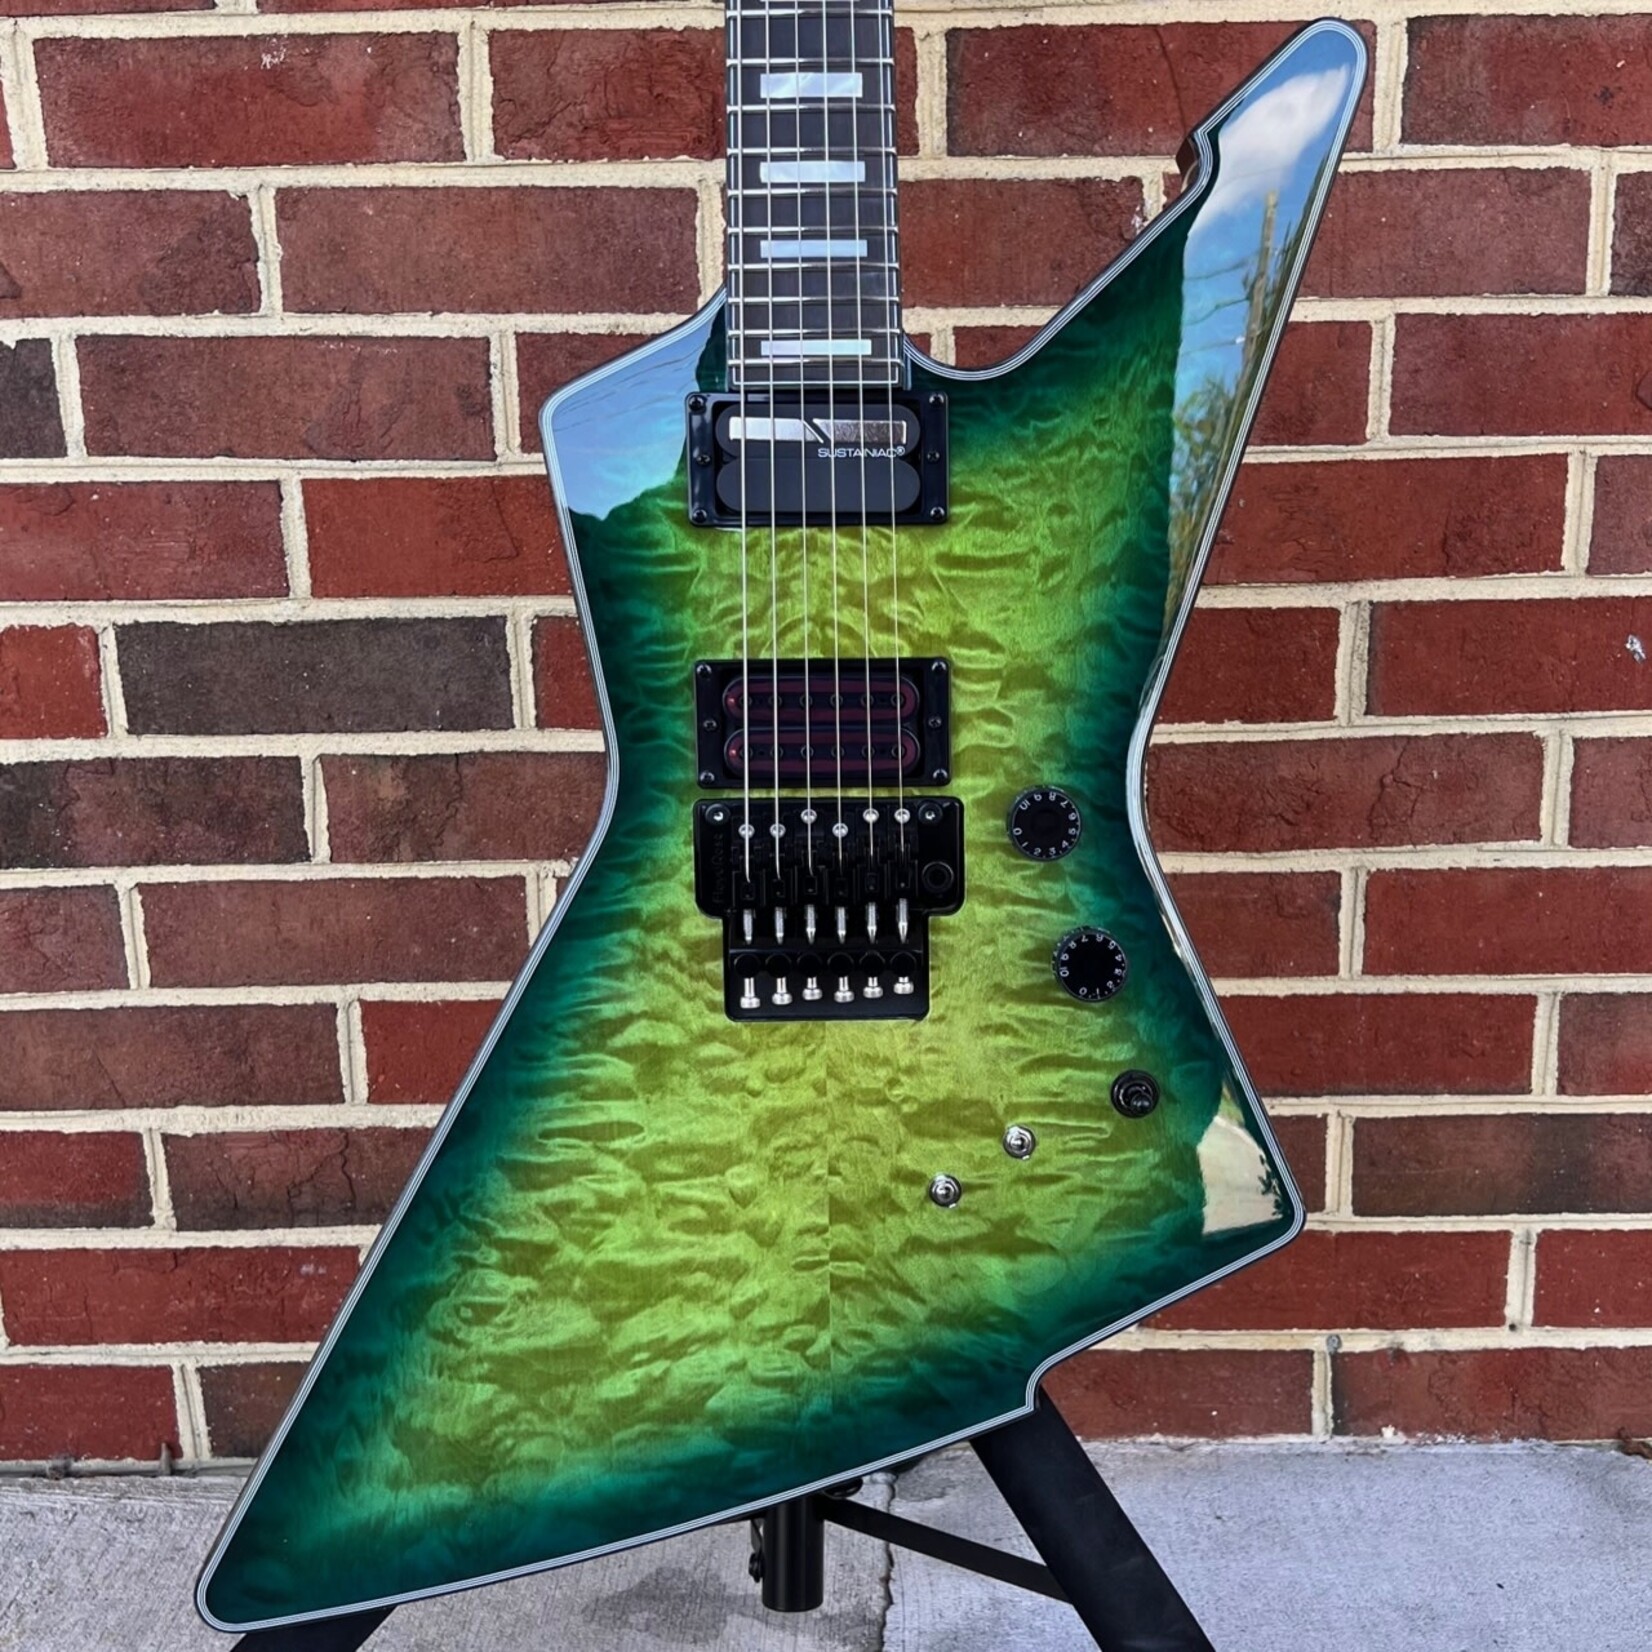 Schecter Guitar Research Schecter E-1 FR S Special Edition, Green Burst, Quilted Maple Top, Sustainiac Pickup, SN# W23050933